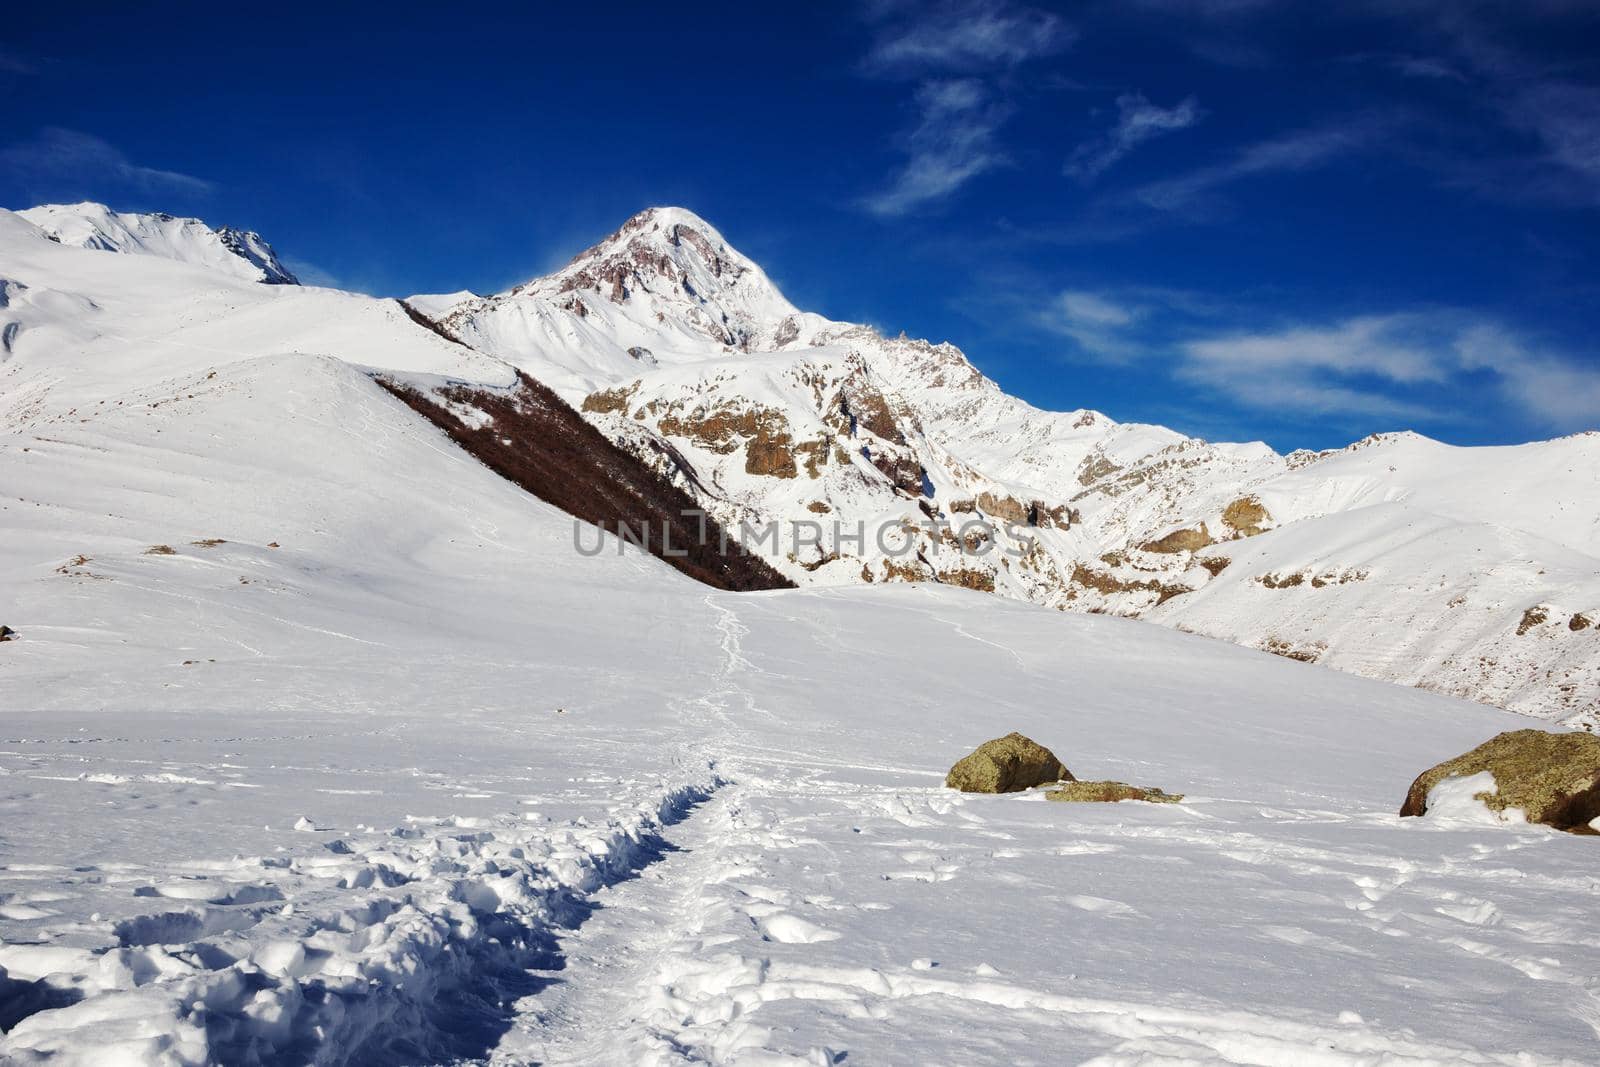 Hiking trail in the mountains. Landscape with snow-capped mountain peaks and clouds in the blue sky. The footpath leads to the foot of the Caucasus Mountains. Caucasian mountains.